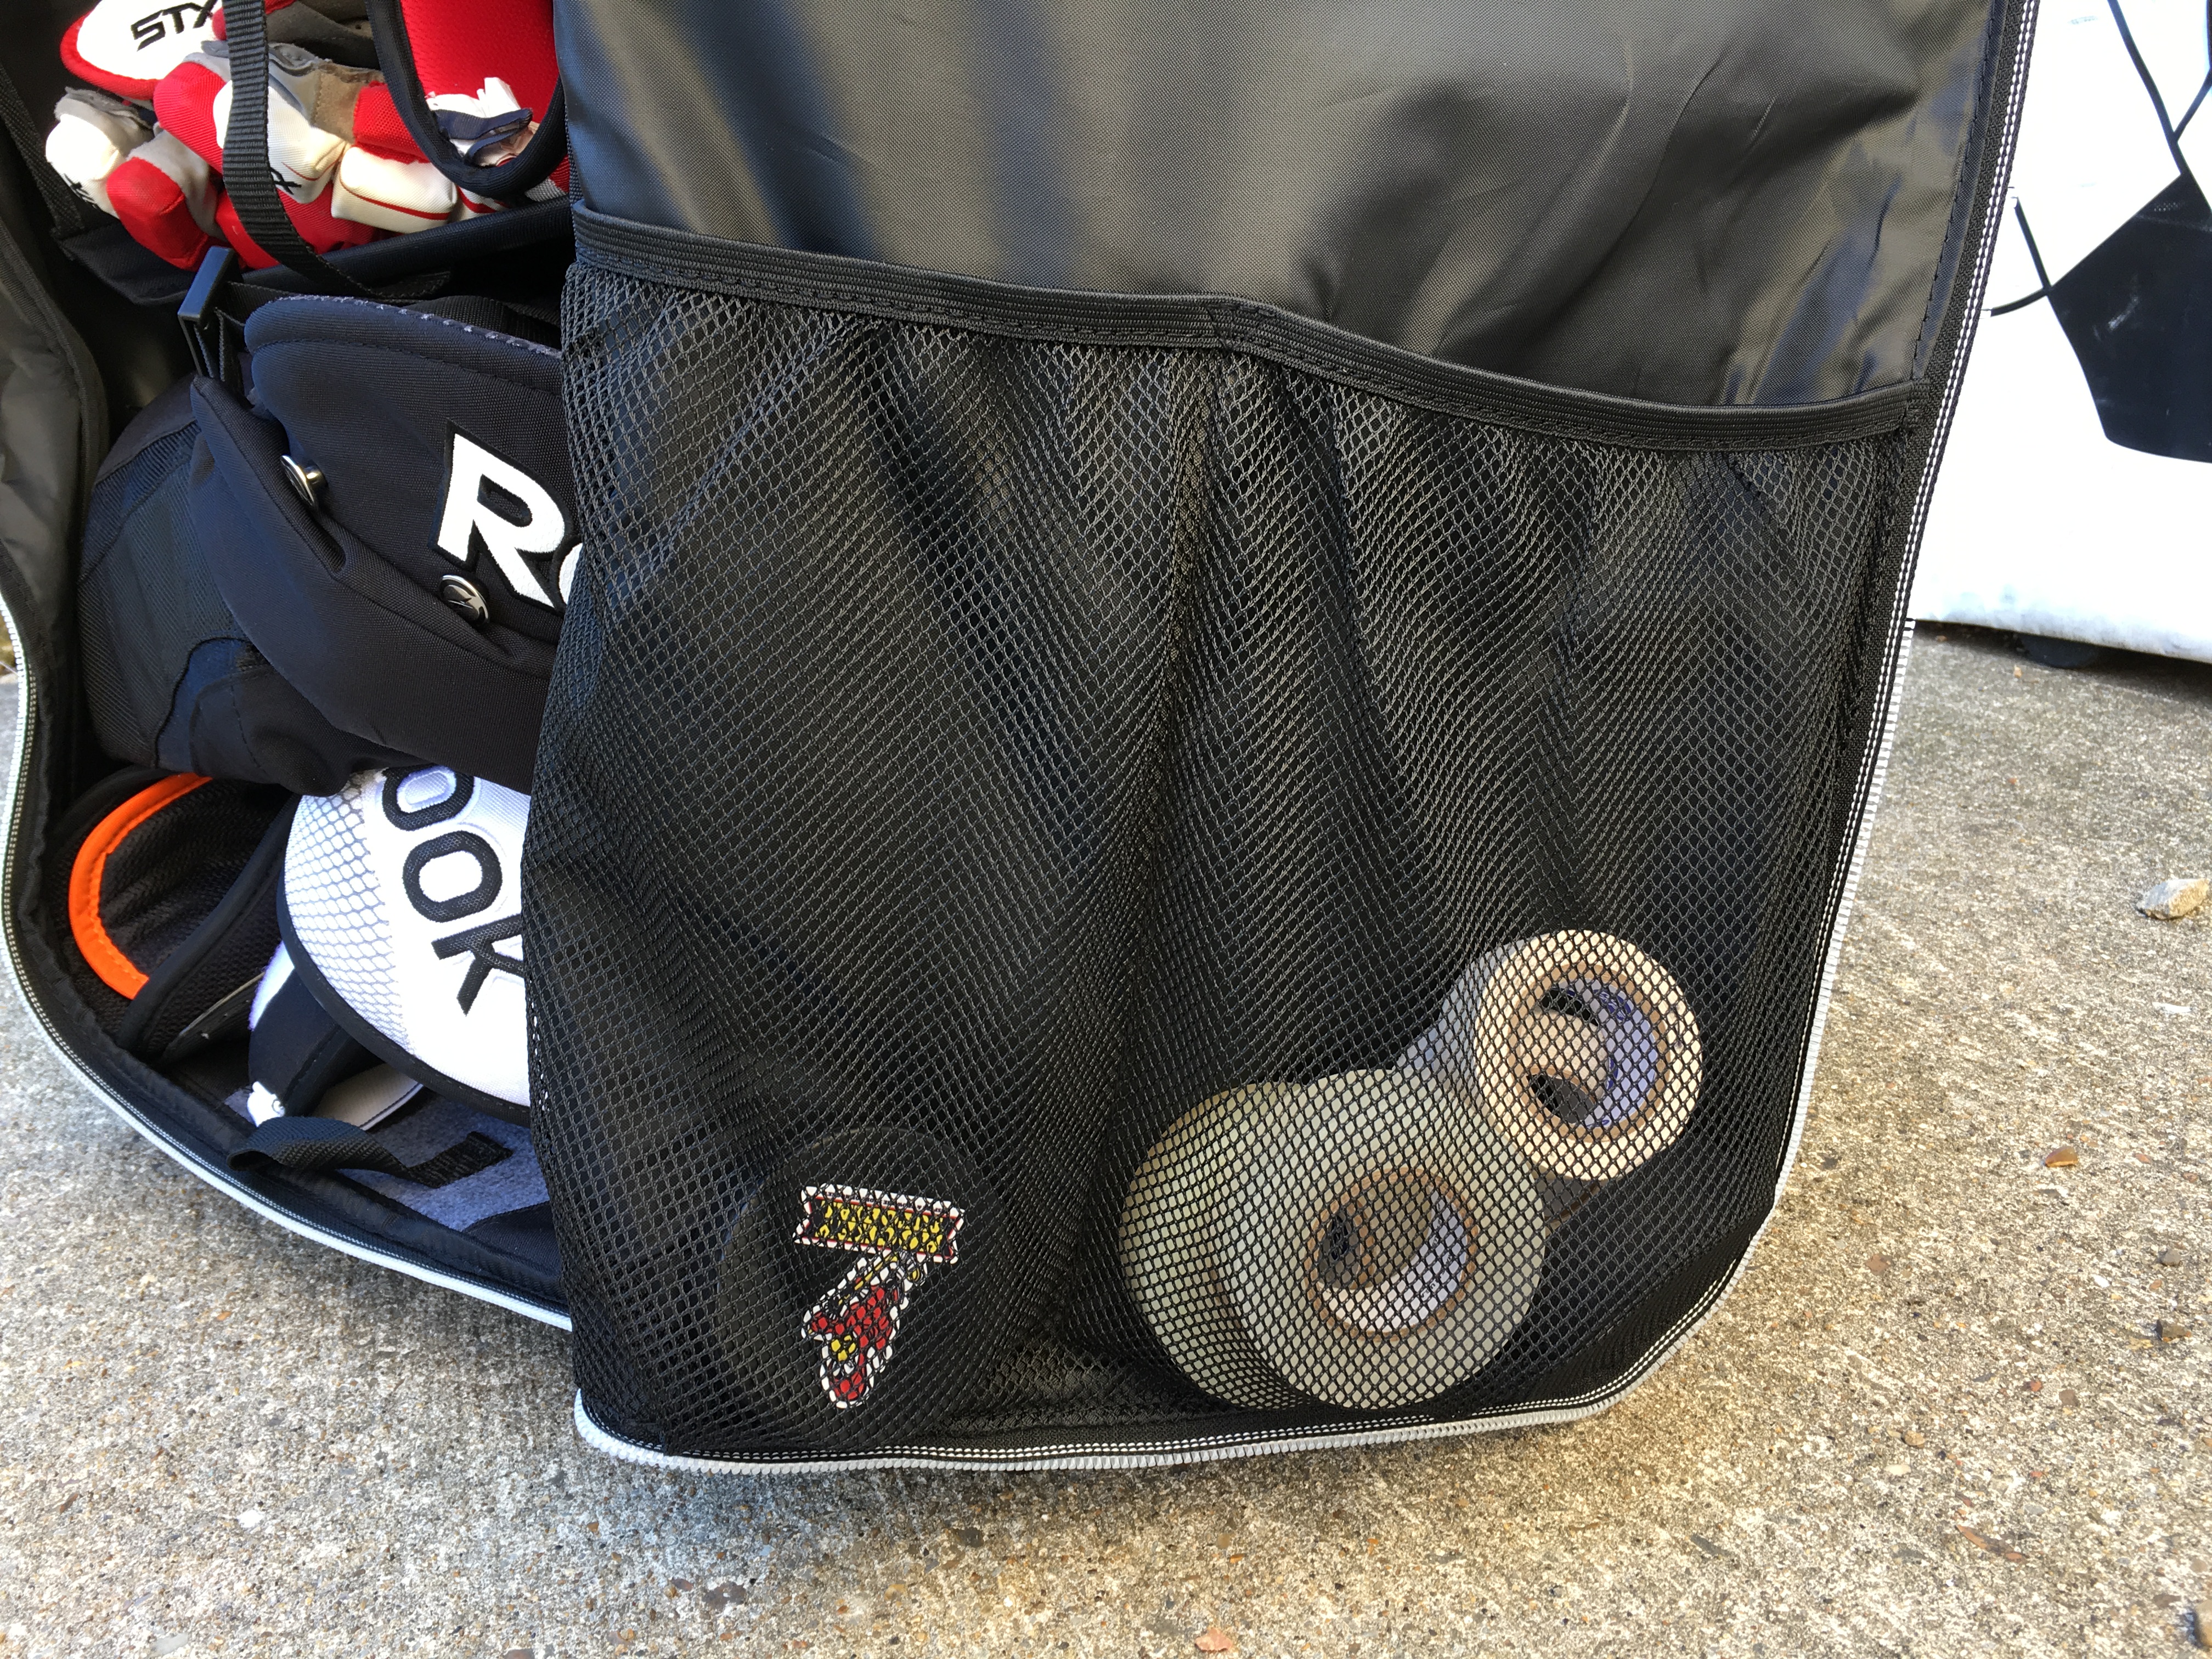 Grit HTSE Tower Hockey bag review9166